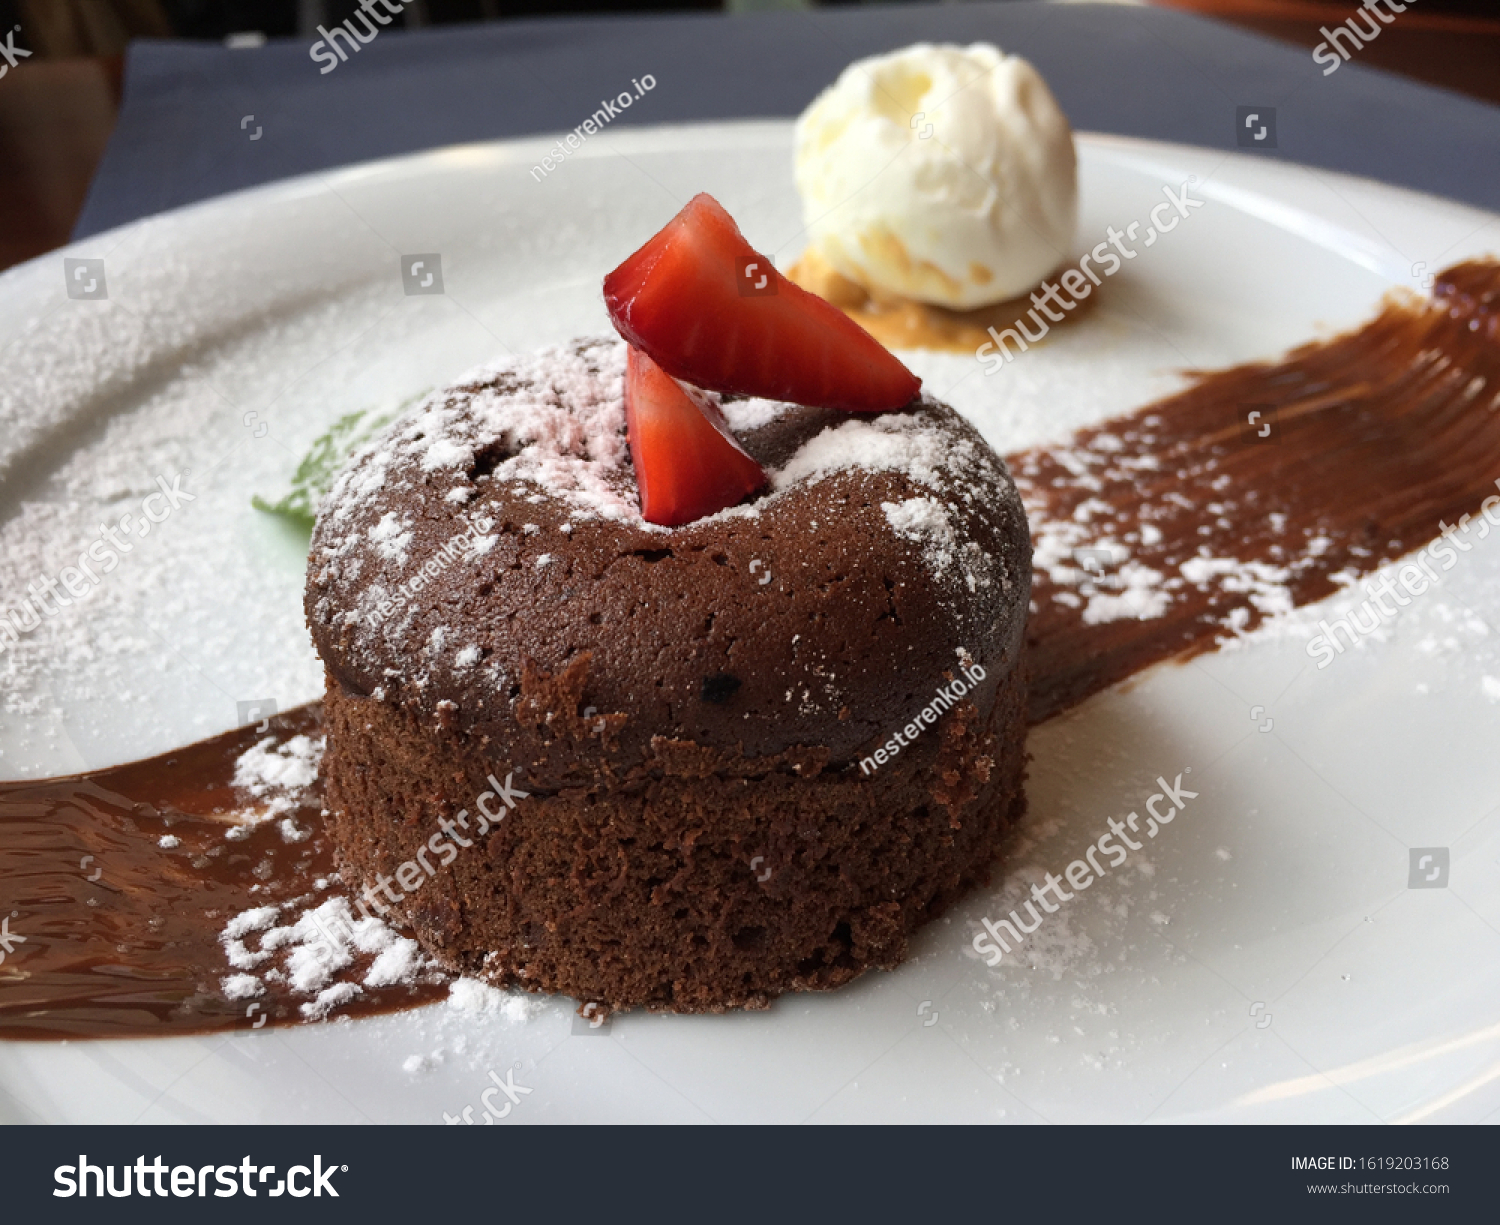 petit gâteau, chocolate fondant, dessert composed of a small chocolate cake with crunchy rind and mellow filling that is served hot with vanilla ice cream on a plate. #1619203168